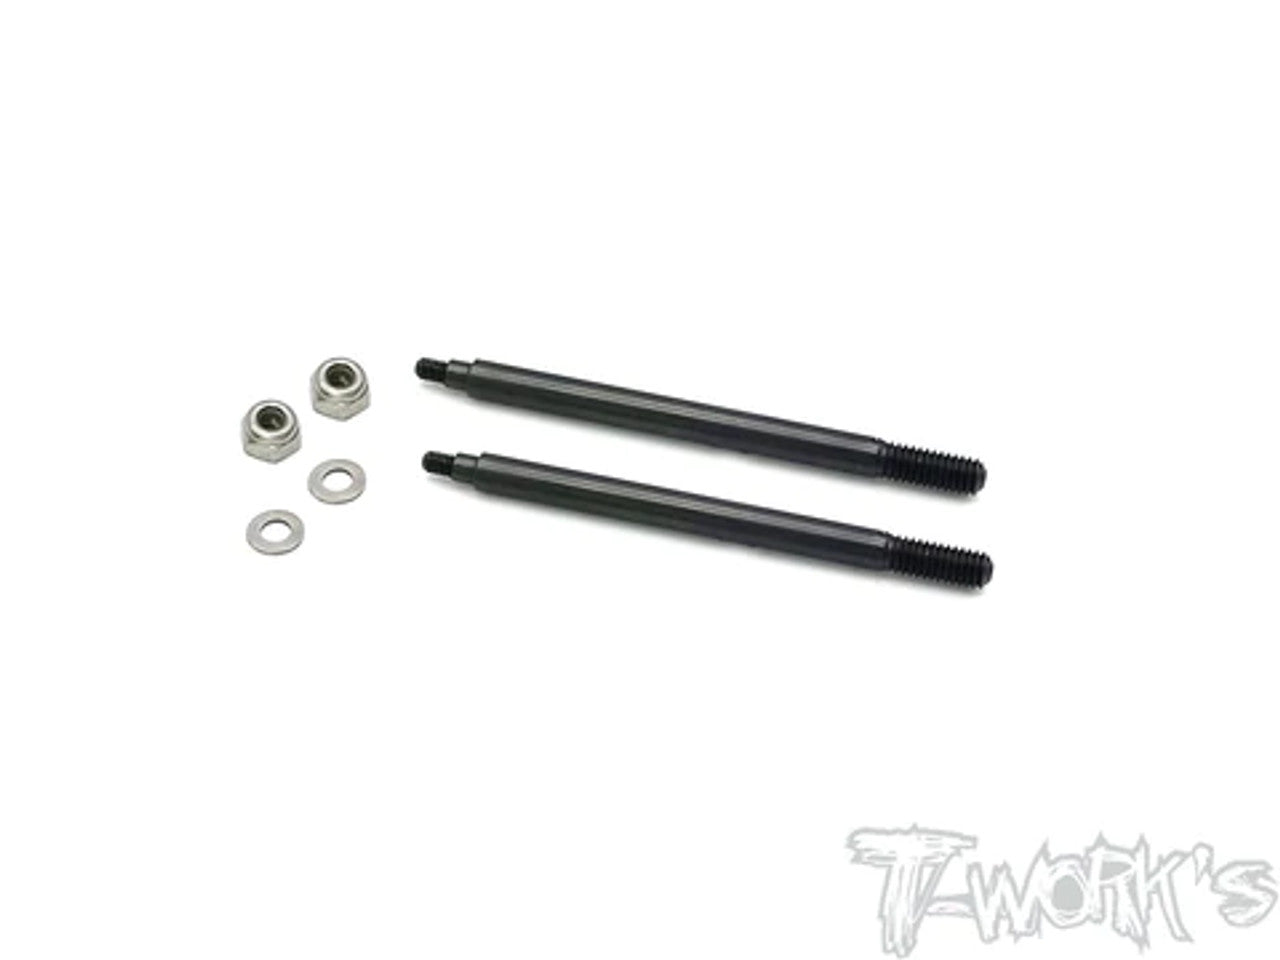 DLC coated Front Shock Shaft 57.9mm. ( For AGAMA A319 )